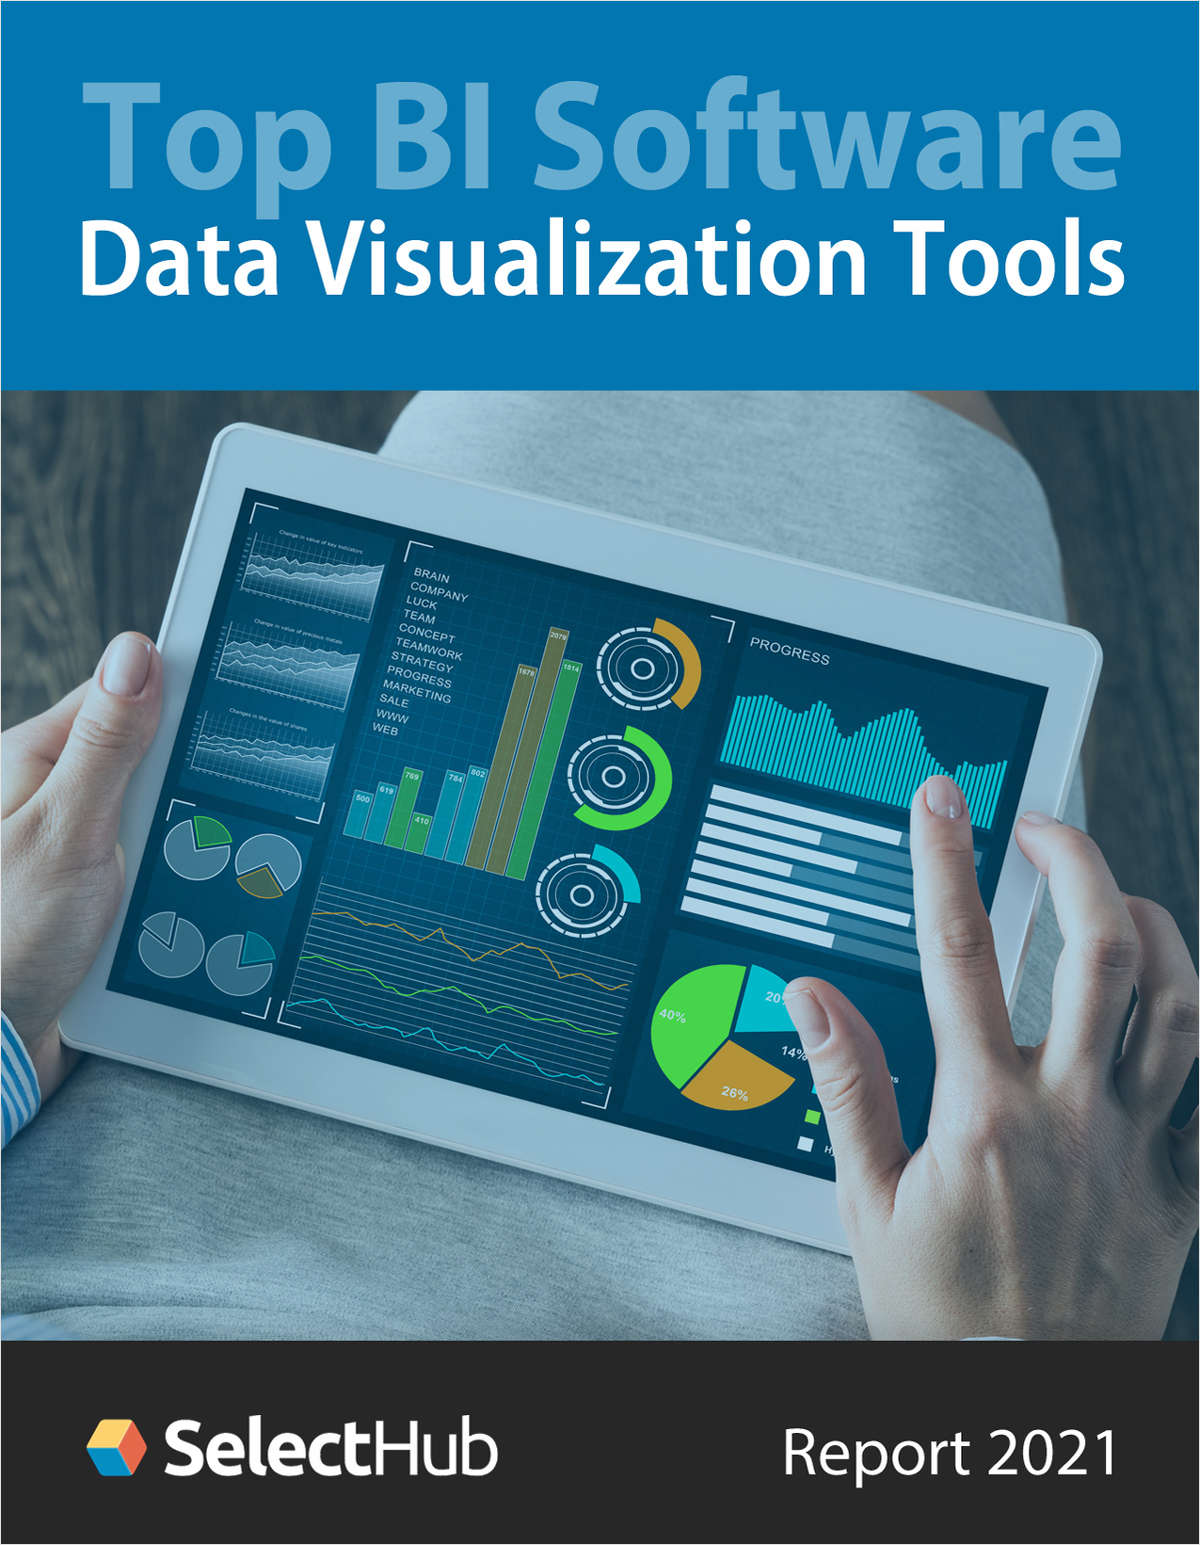 Top 5 Data Visualization Tools―Evaluation, Pricing & Recommendations